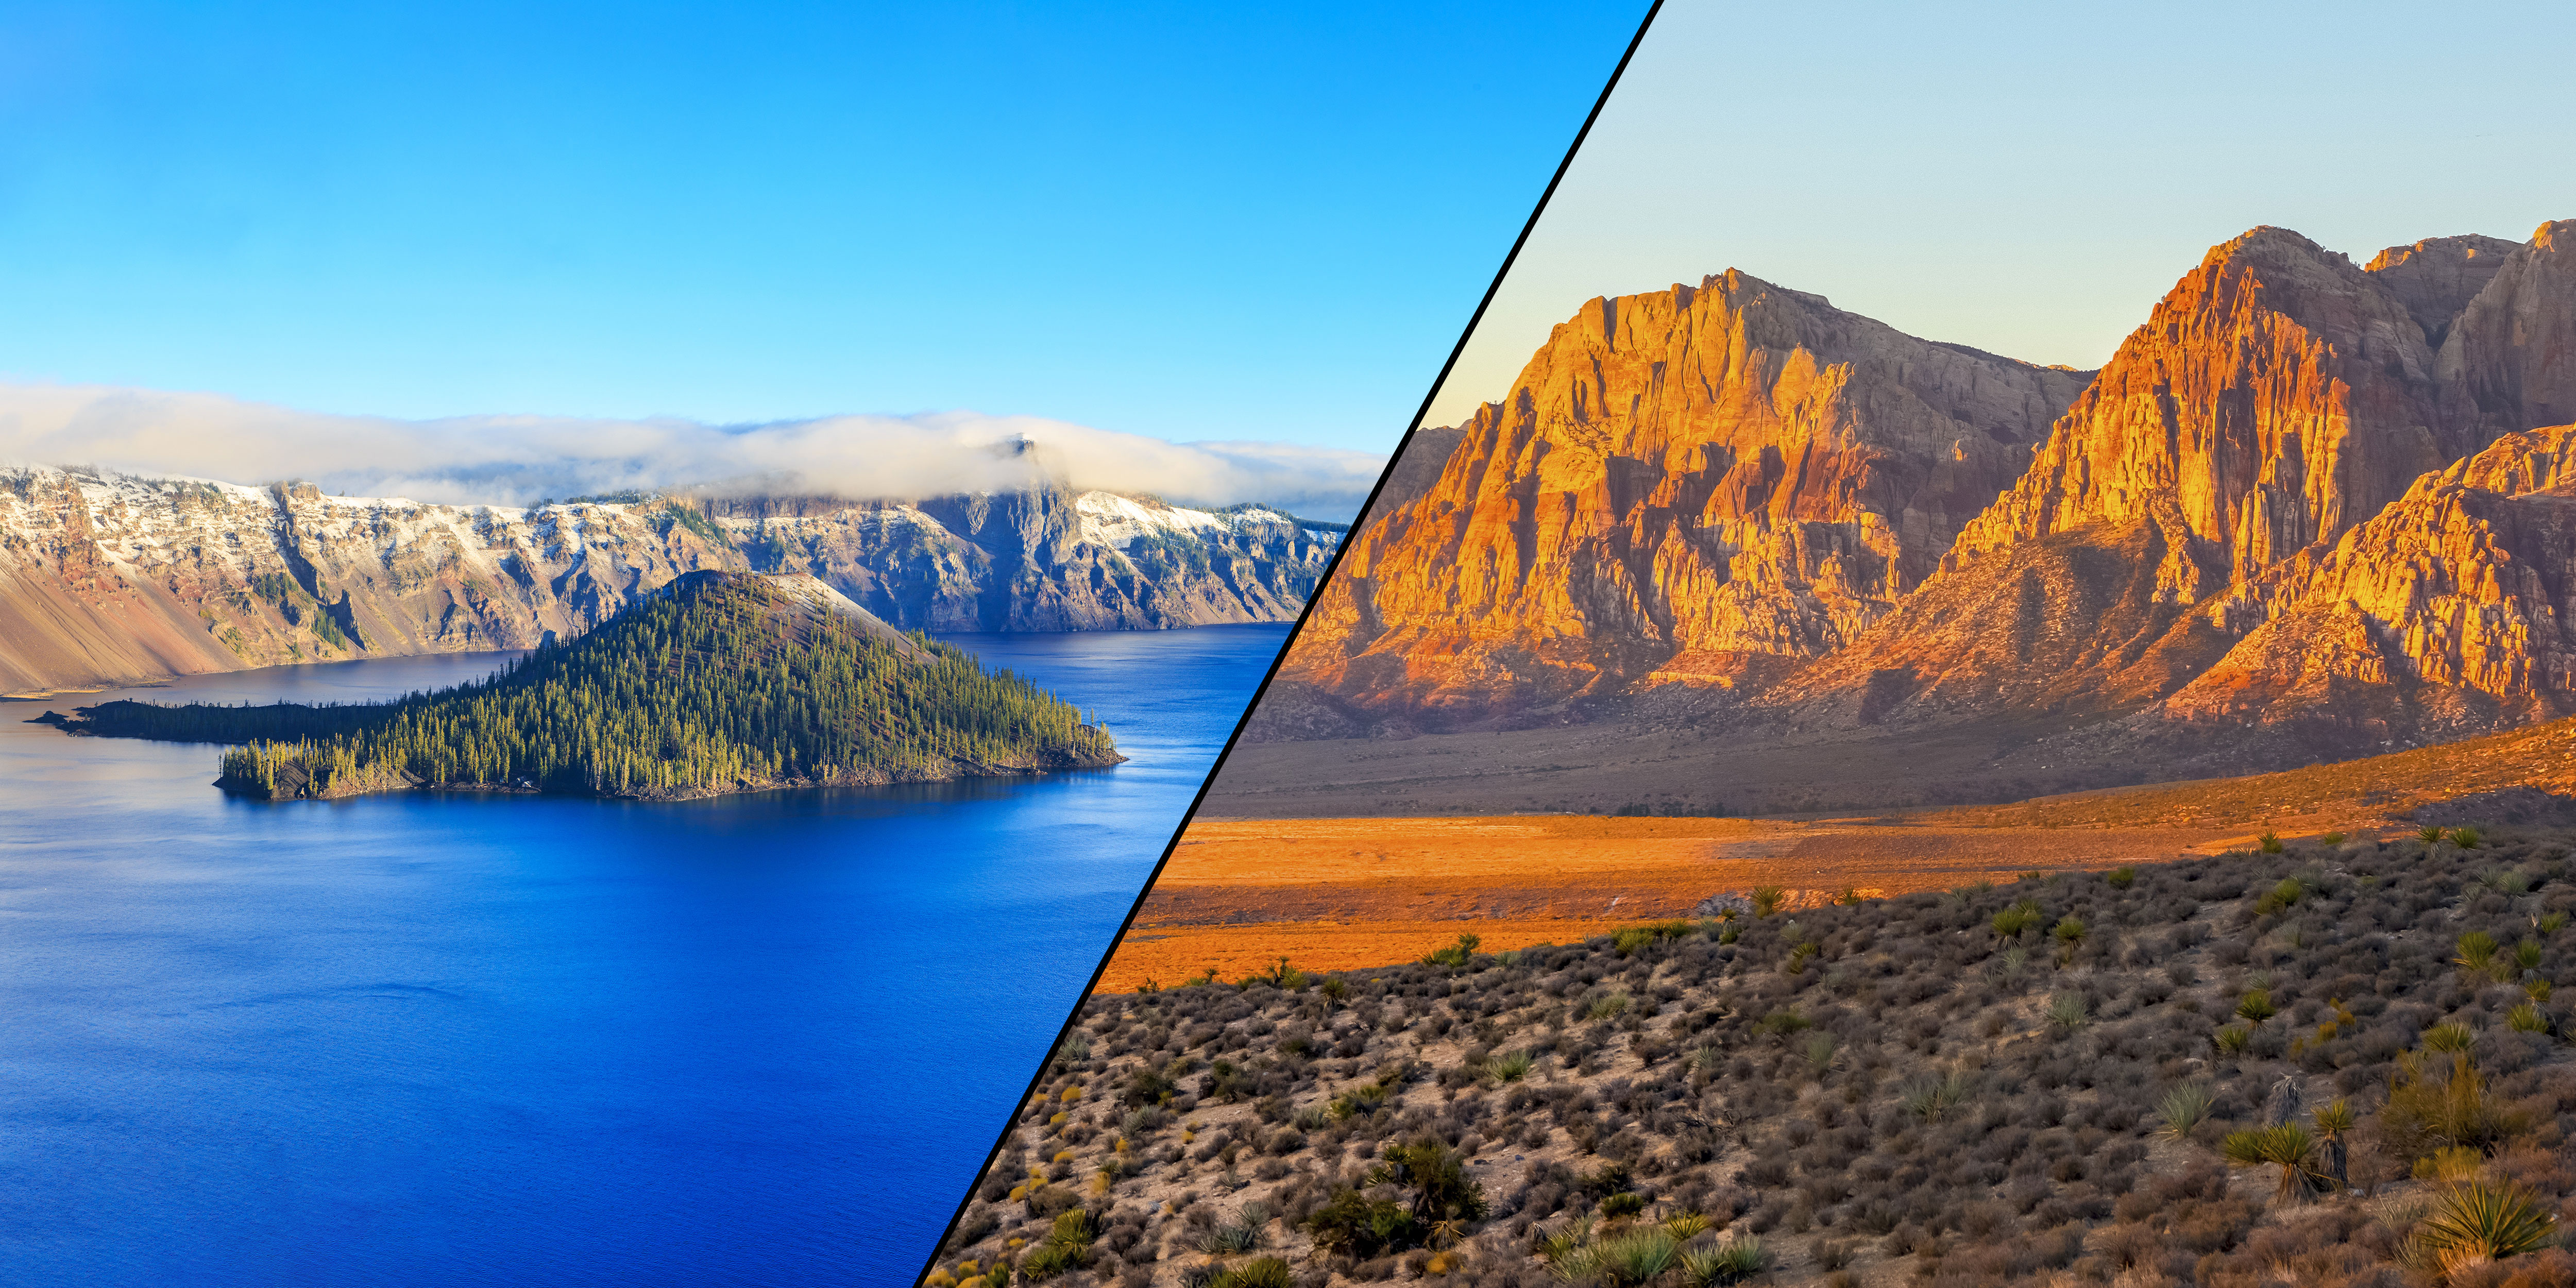 Crater Lake (elena_suvorova: https://stock.adobe.com/images/crater-lake-national-park-in-oregon-usa/100823036) Red Rock Canyon (John Anderson: https://stock.adobe.com/images/red-rock-canyon-nevada/229989834)